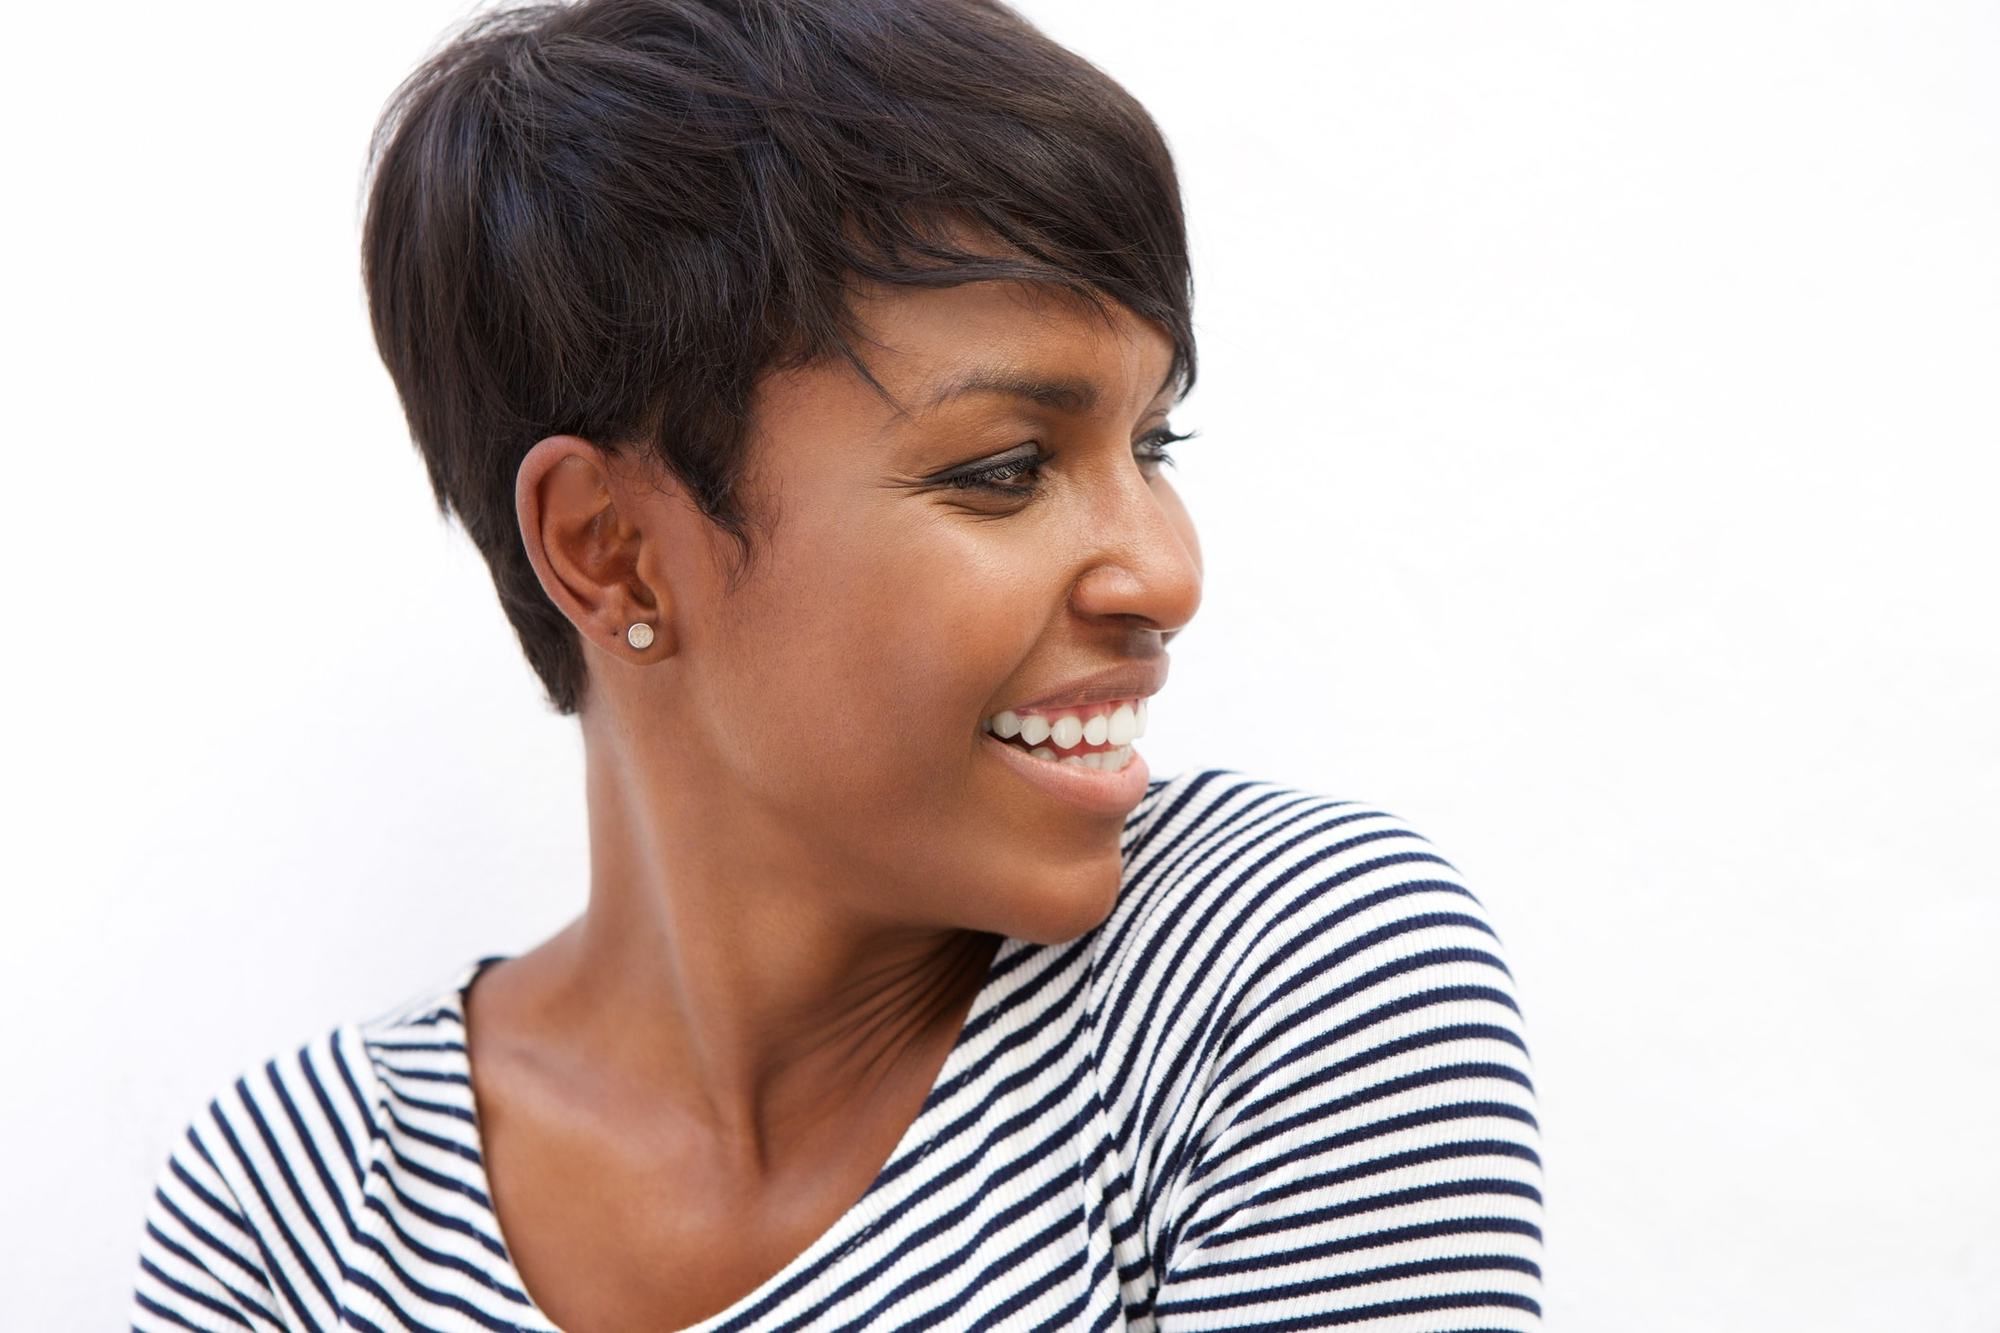 30 Cropped Hairstyles For Black Women | All Things Hair Inside Subtle Textured Short Hairstyles (View 11 of 25)